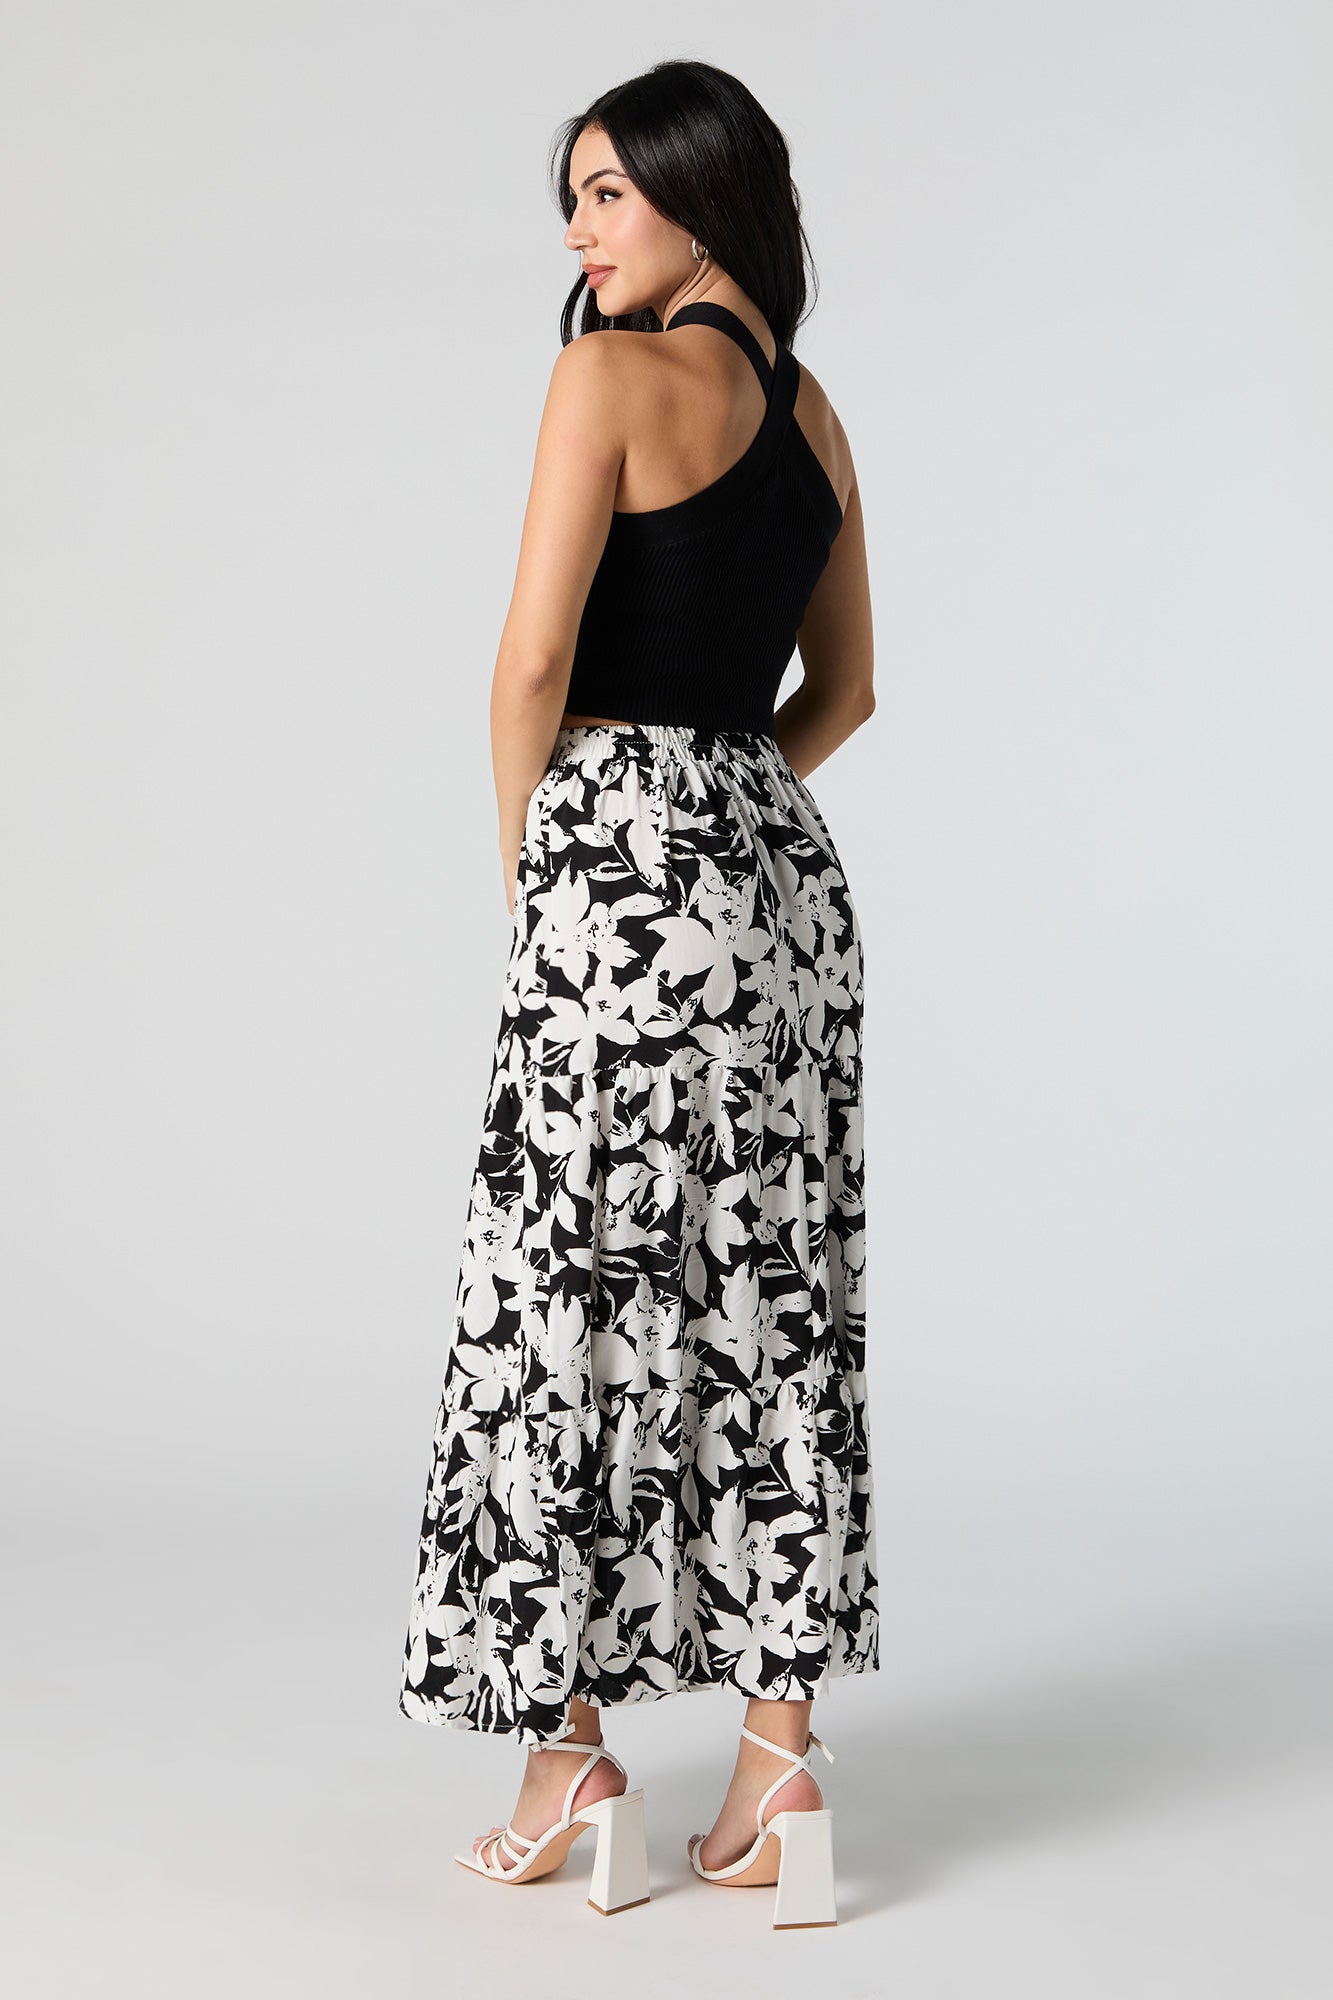 Floral Print Tiered Maxi Skirt